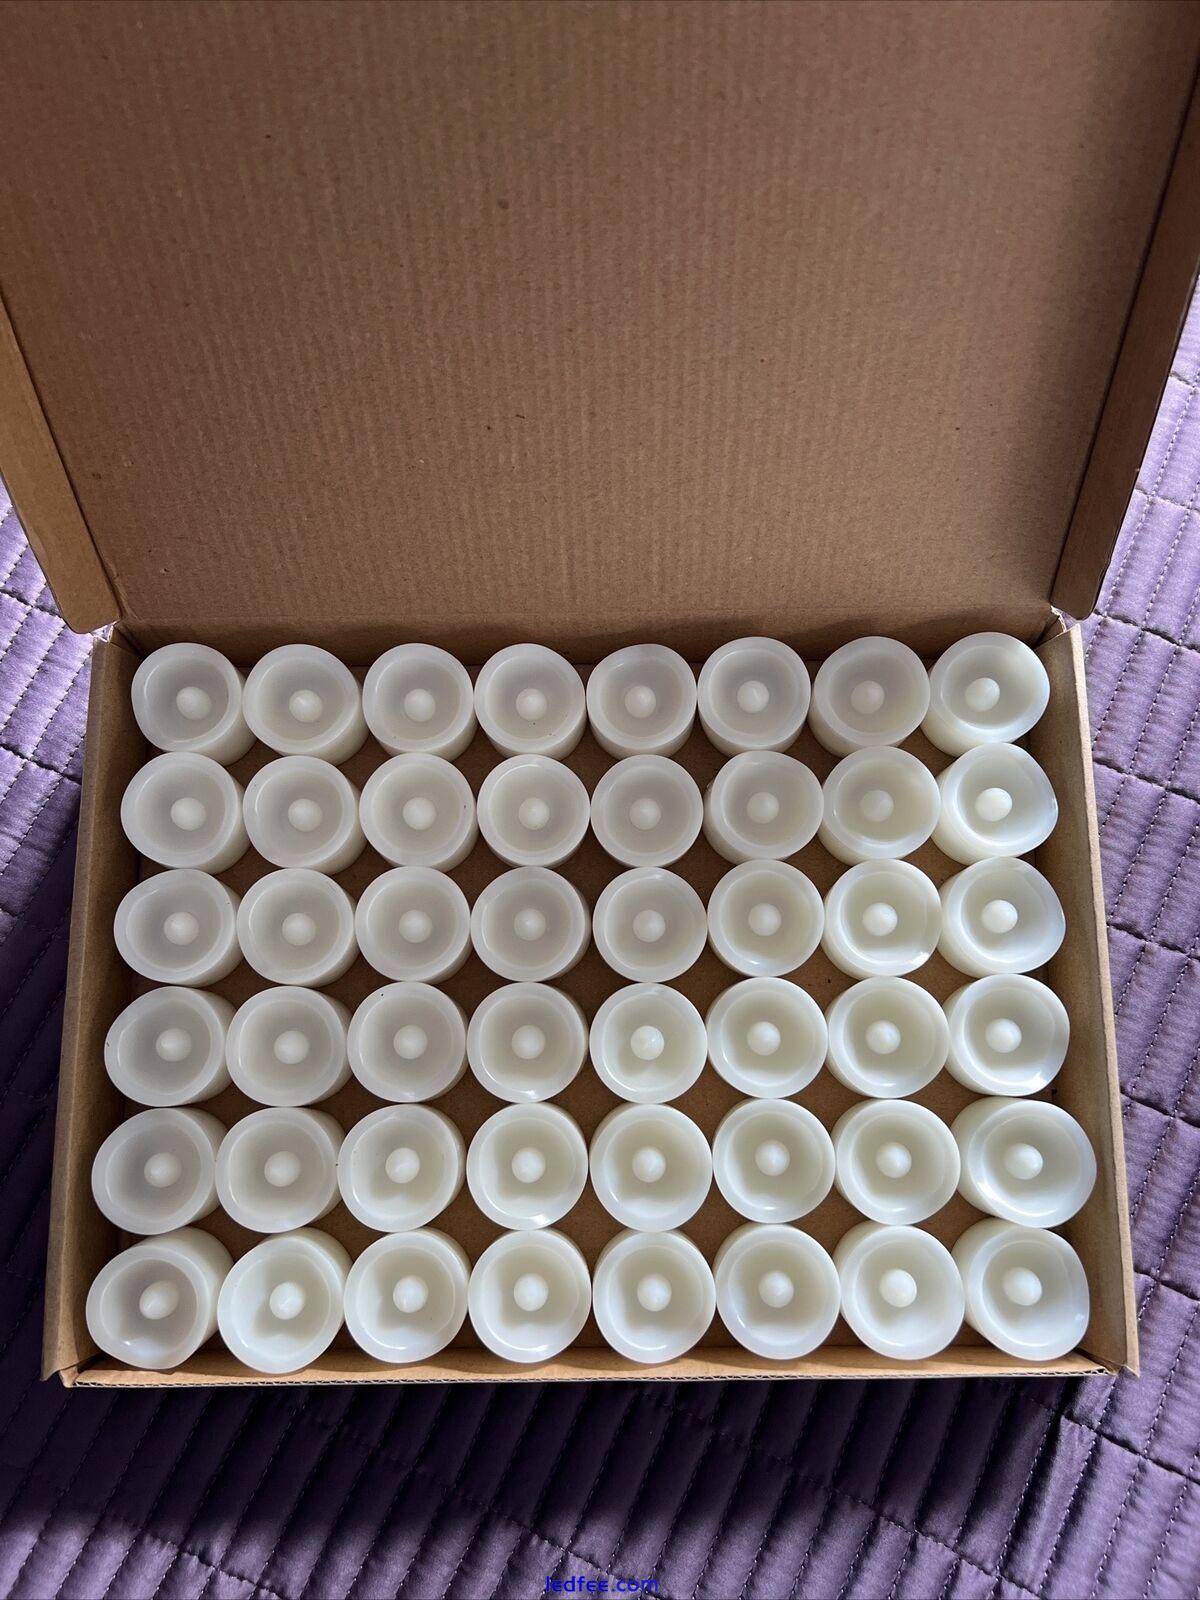 48pc Battery Operated Flameless LED Candles - Warm White - New 3 